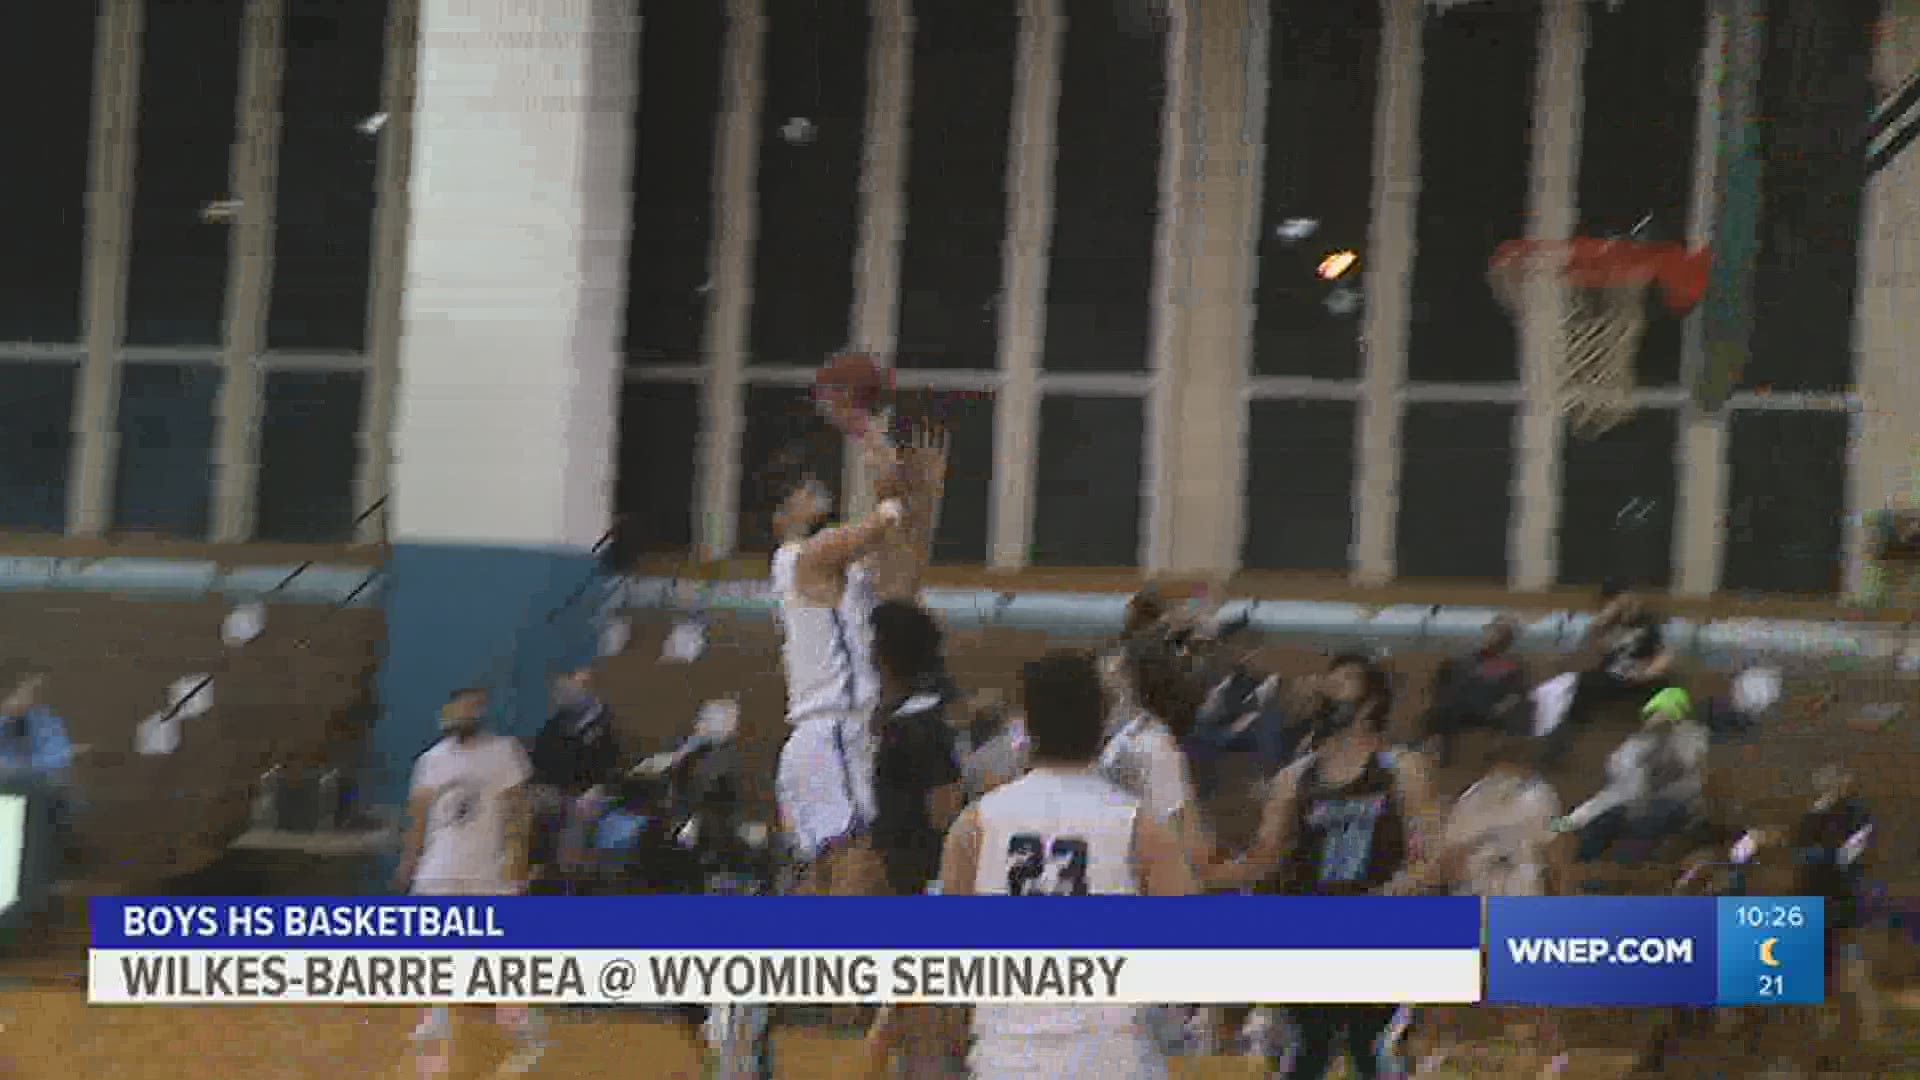 Wyoming Seminary, behind Jake Koretz, handed Wilkes-Barre Area their first loss by a 47-46 score